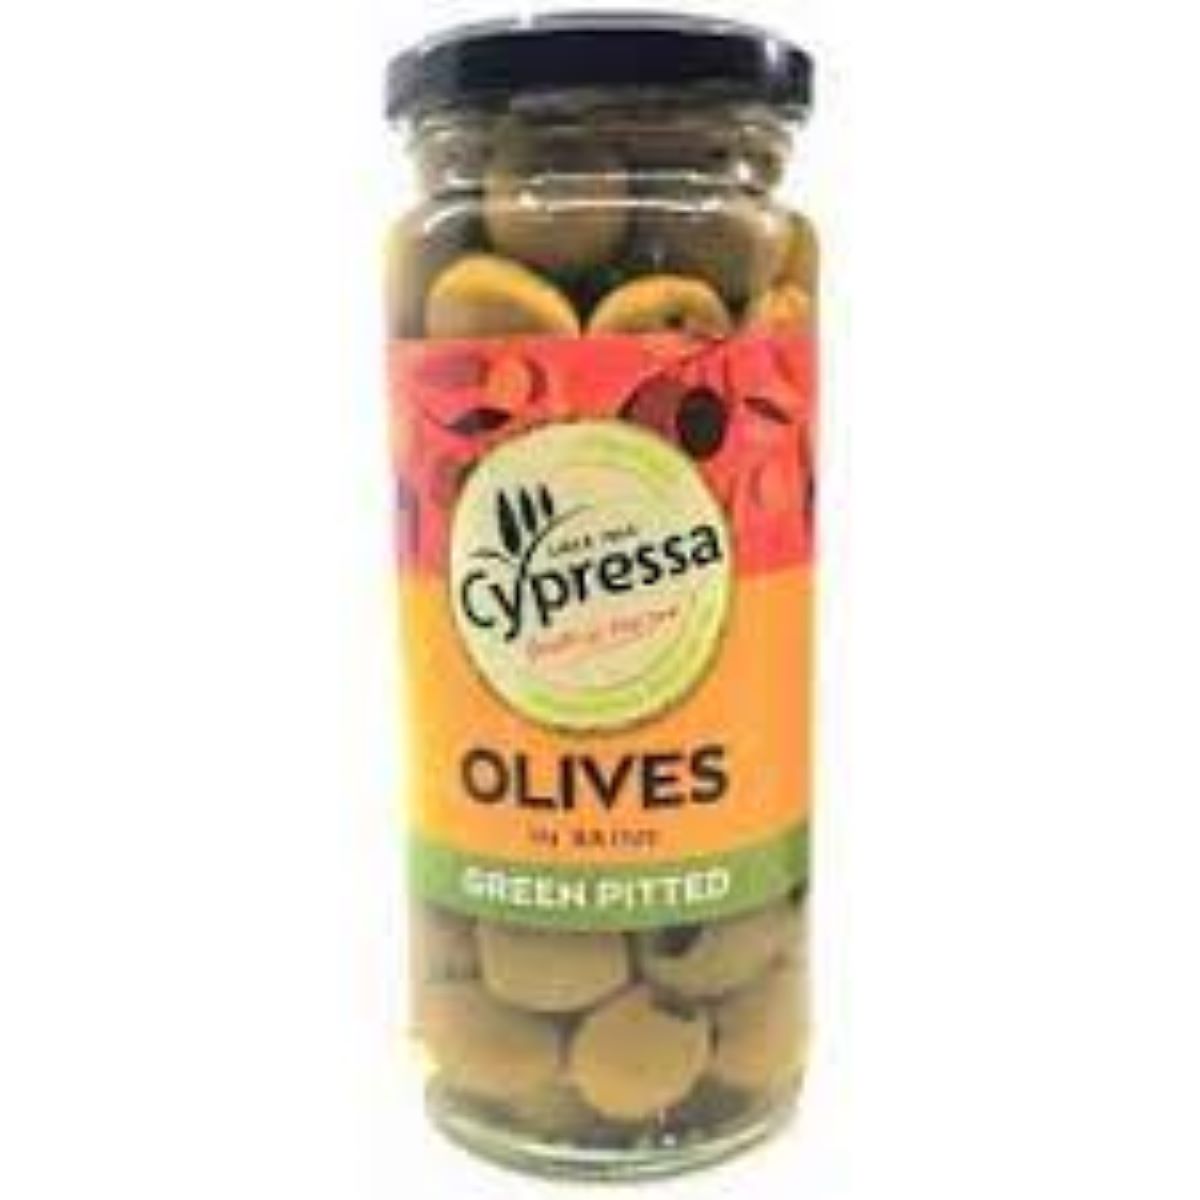 Cypressa Olives Green Pitted 340g